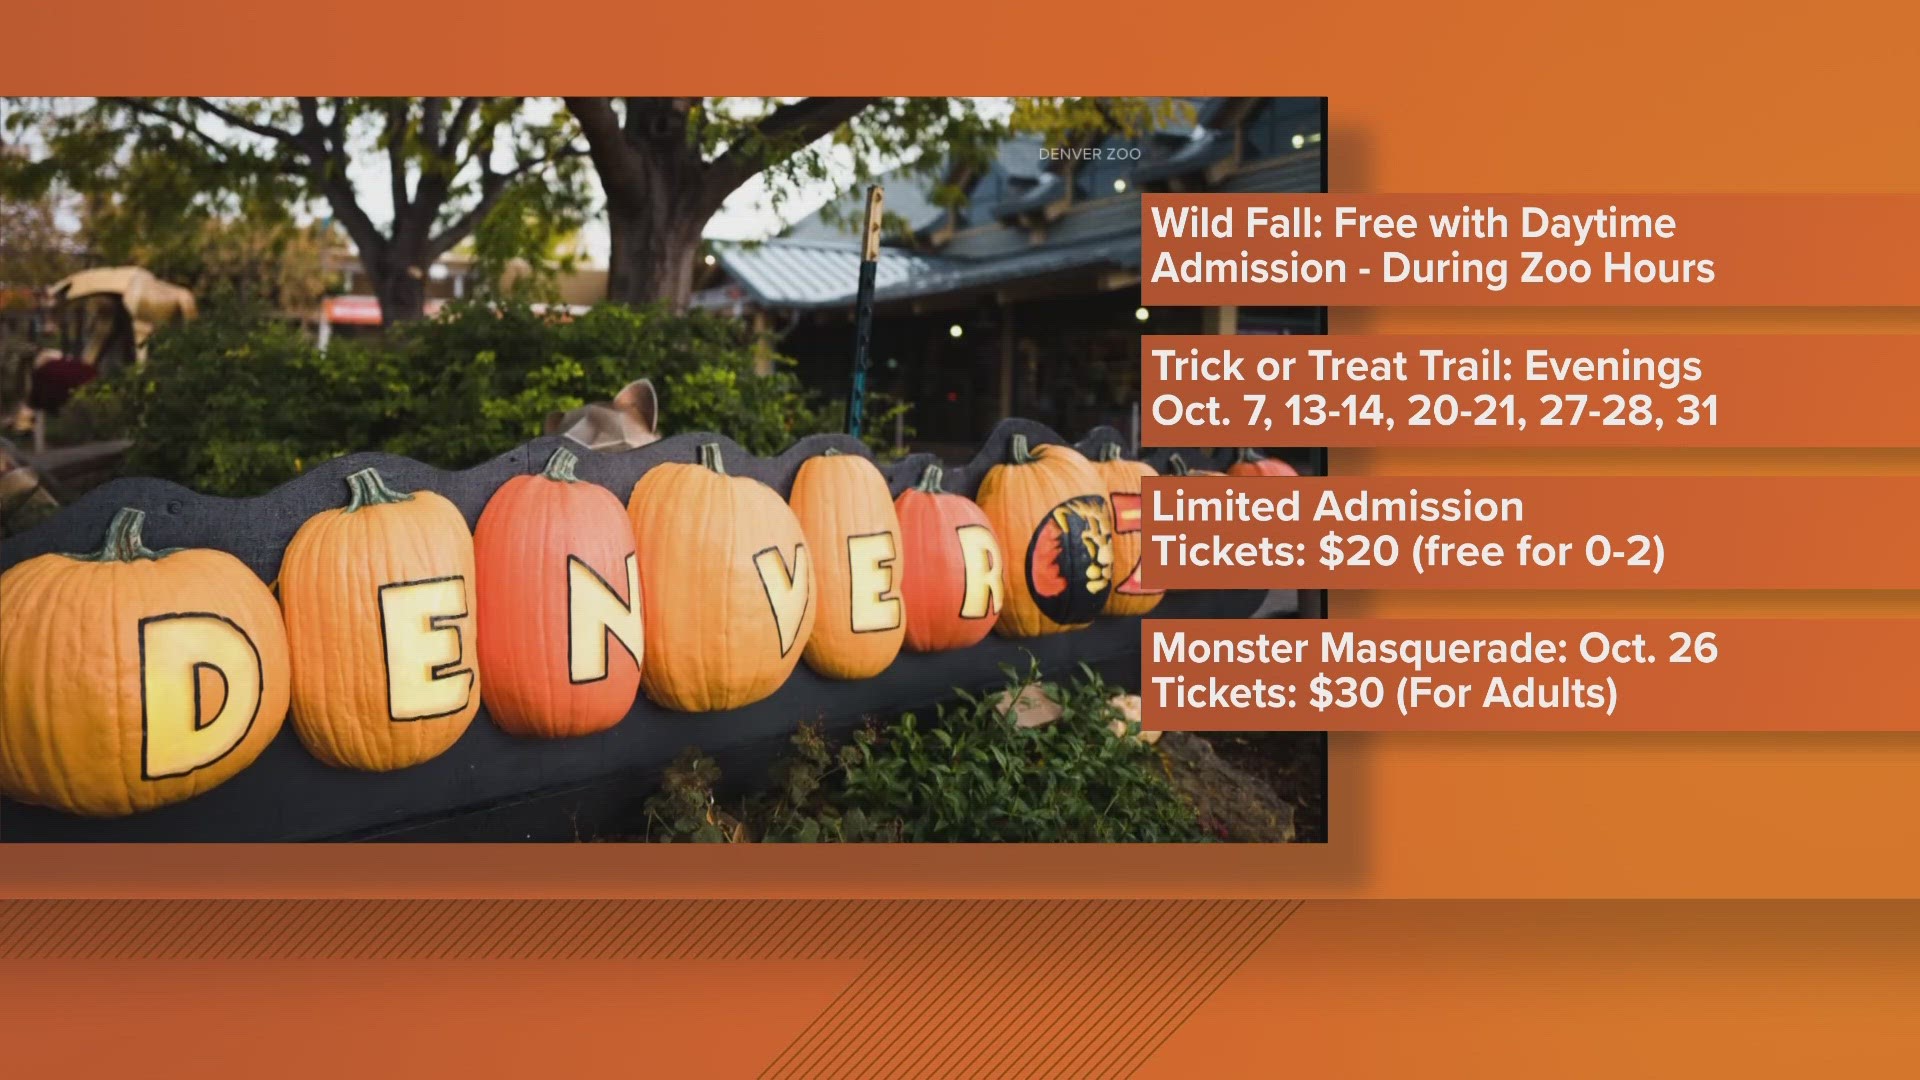 The Denver Zoo has plenty events coming up during the month of October. From trick-or-treating to a monster masquerade, the Denver Zoo will have fall events for all.